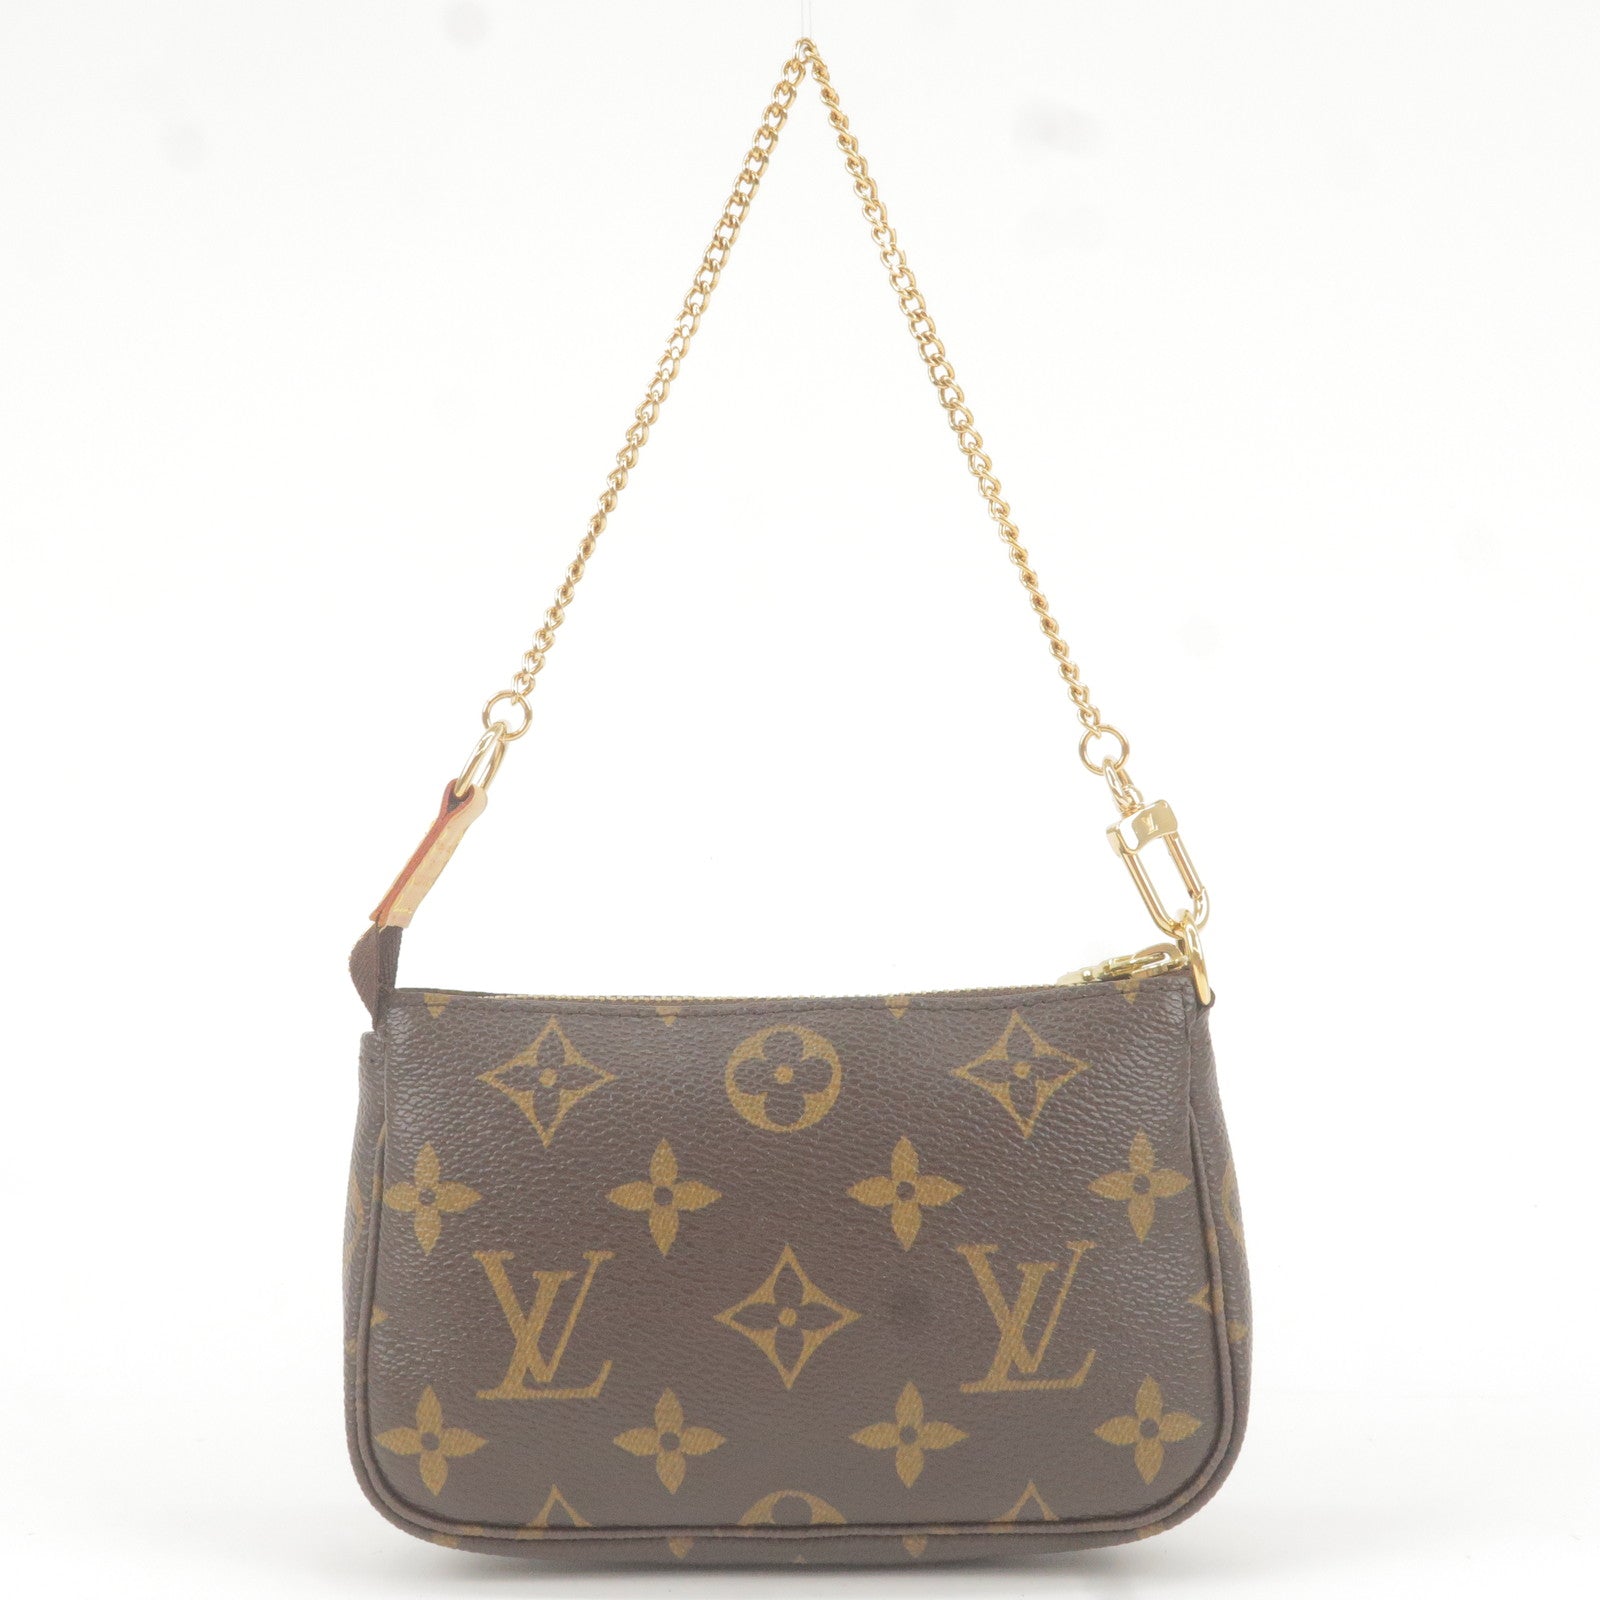 Best Louis Vuitton Boxes (empty) for sale in Honolulu, Hawaii for 2023